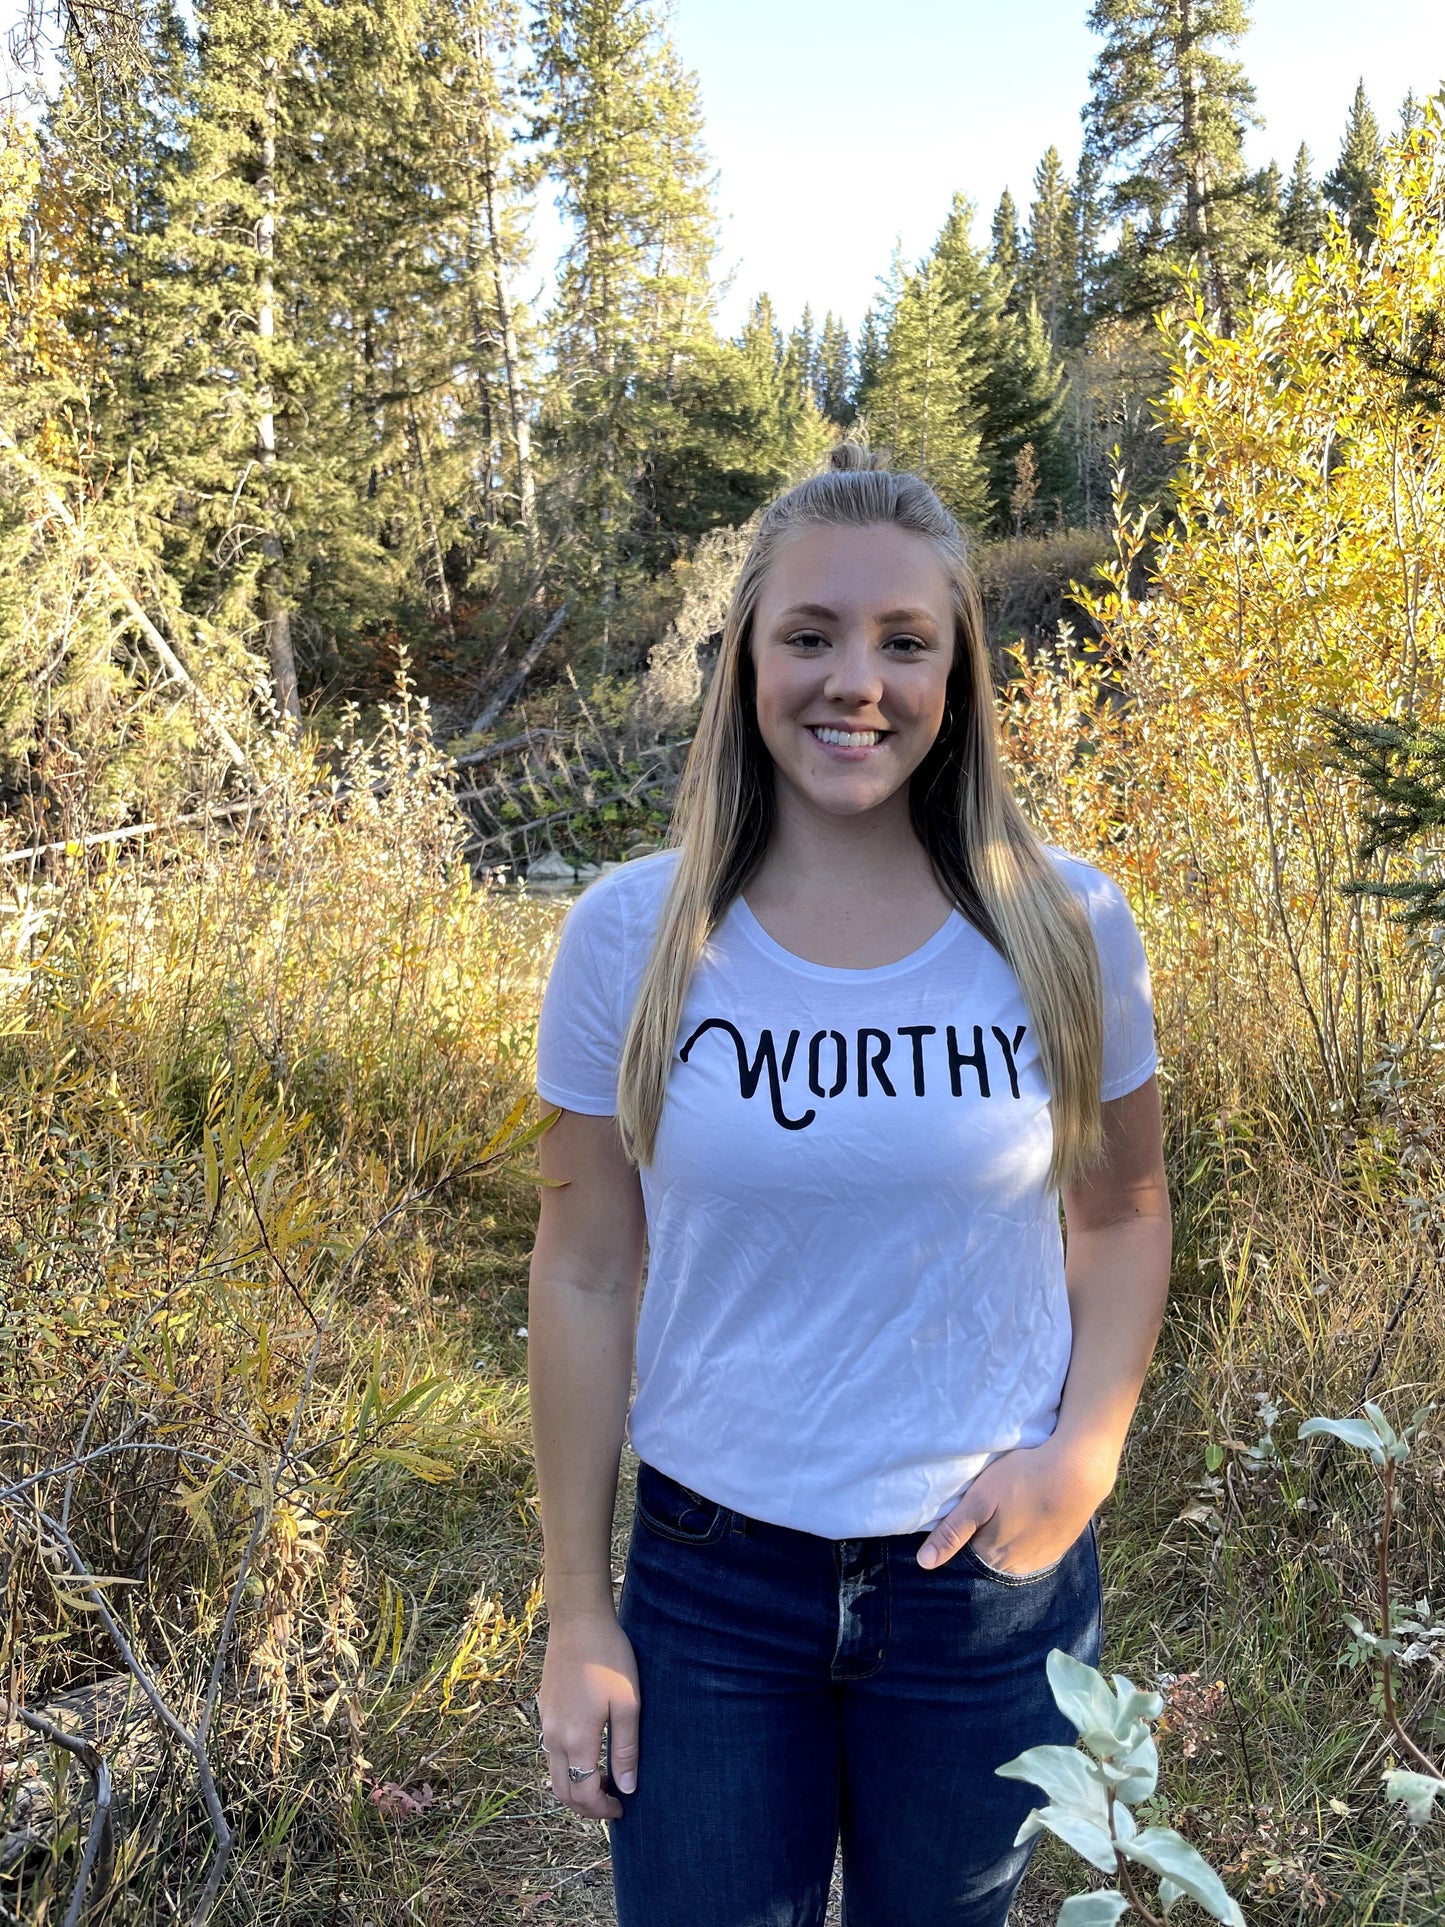 A woman standing in nature, wearing a white t-shirt with black "WORTHY" lettering across the front.